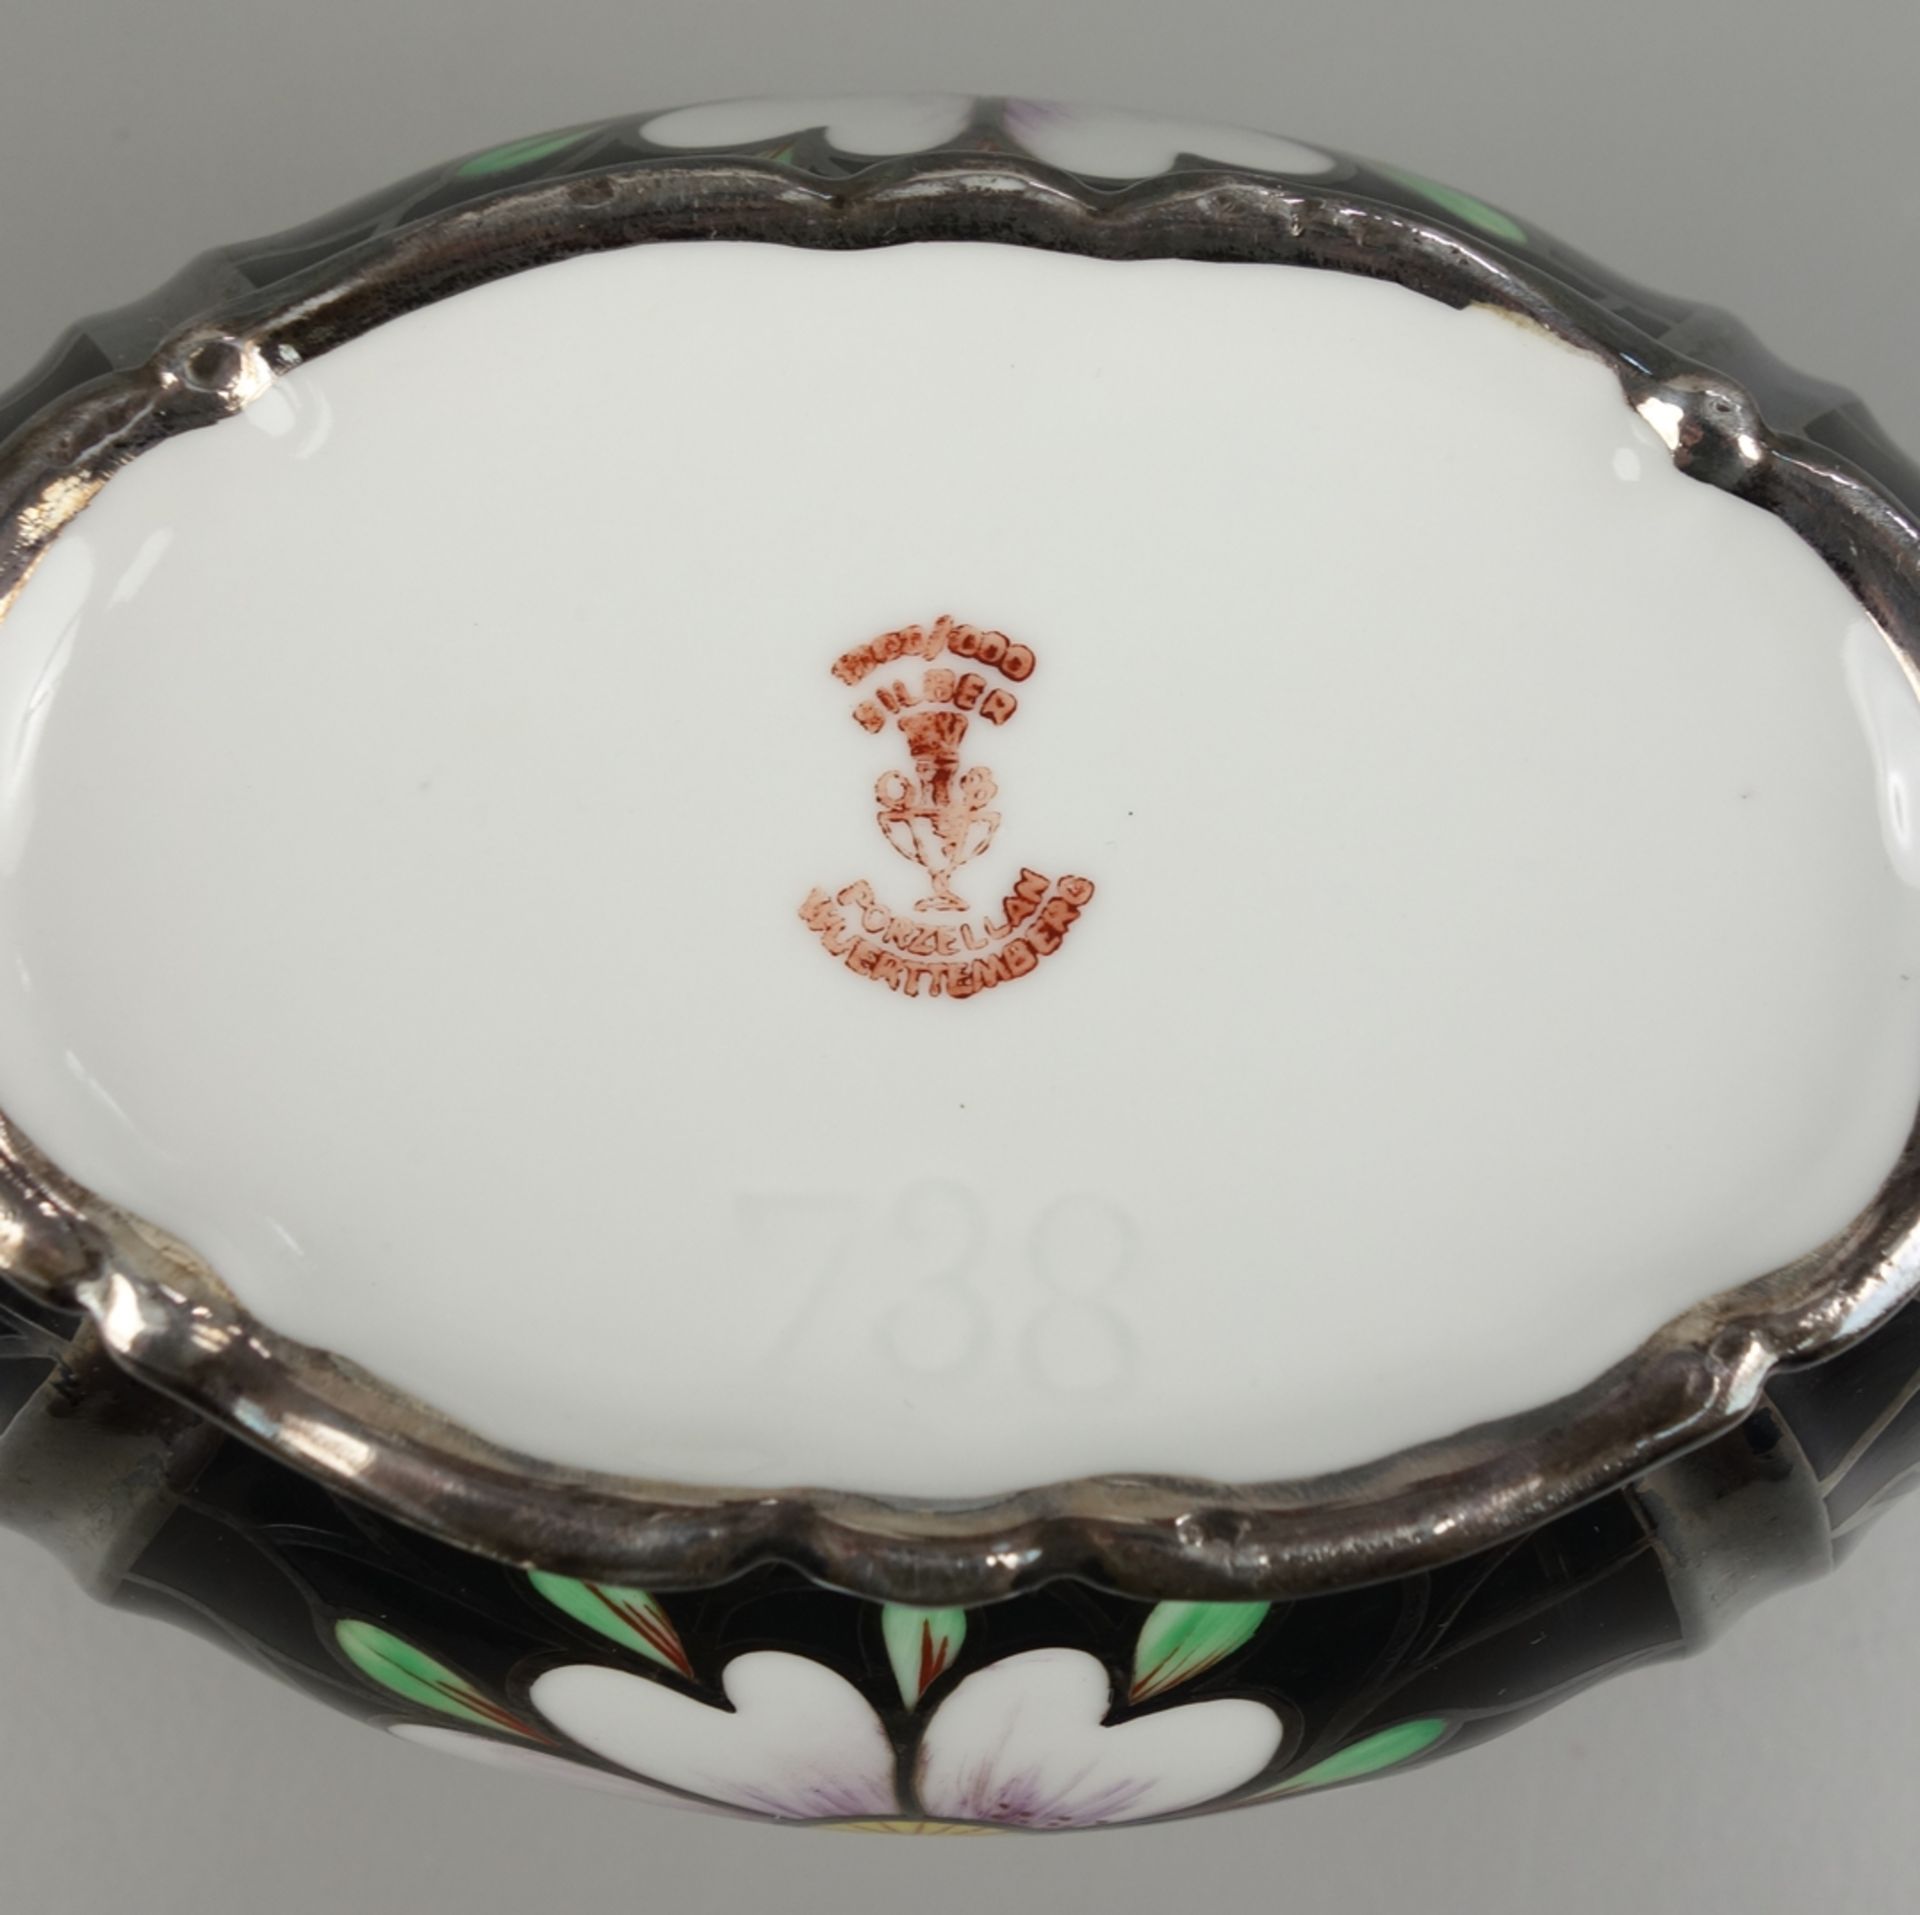 Porcelain box with silver overlay, Württemberg porcelain, 1920/1930s - Image 4 of 4